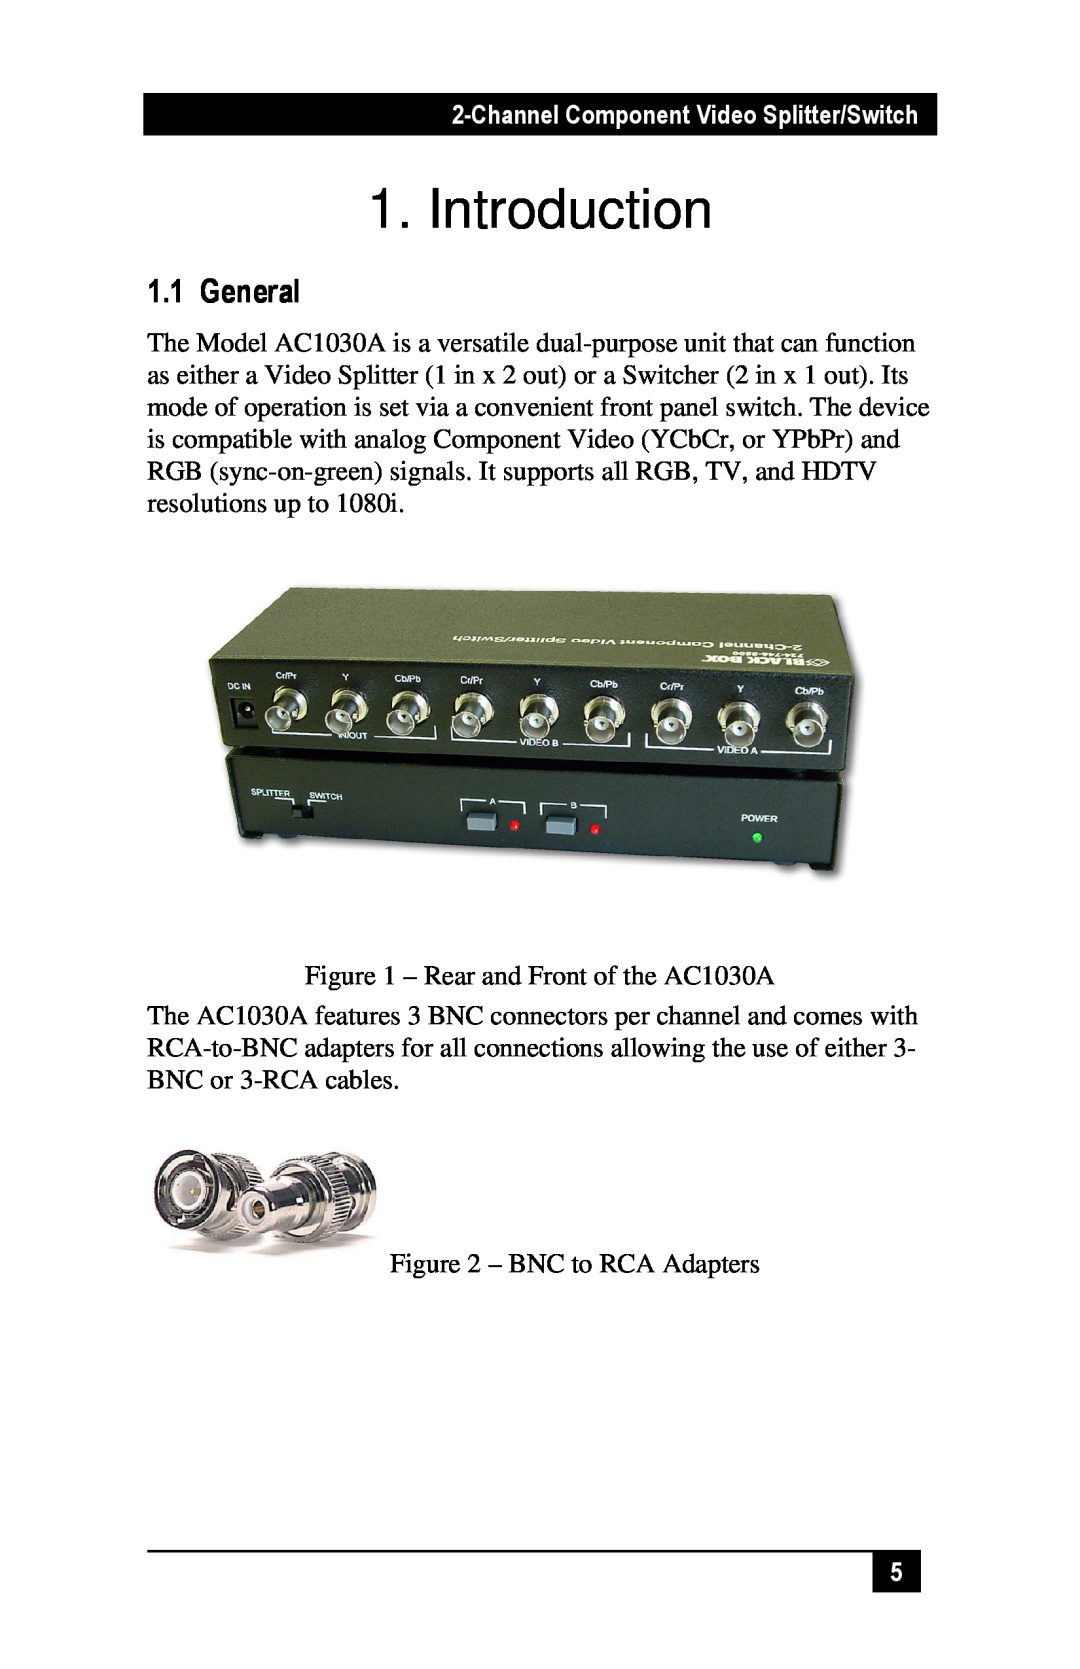 Black Box AC1030A manual Introduction, General, Channel Component Video Splitter/Switch 